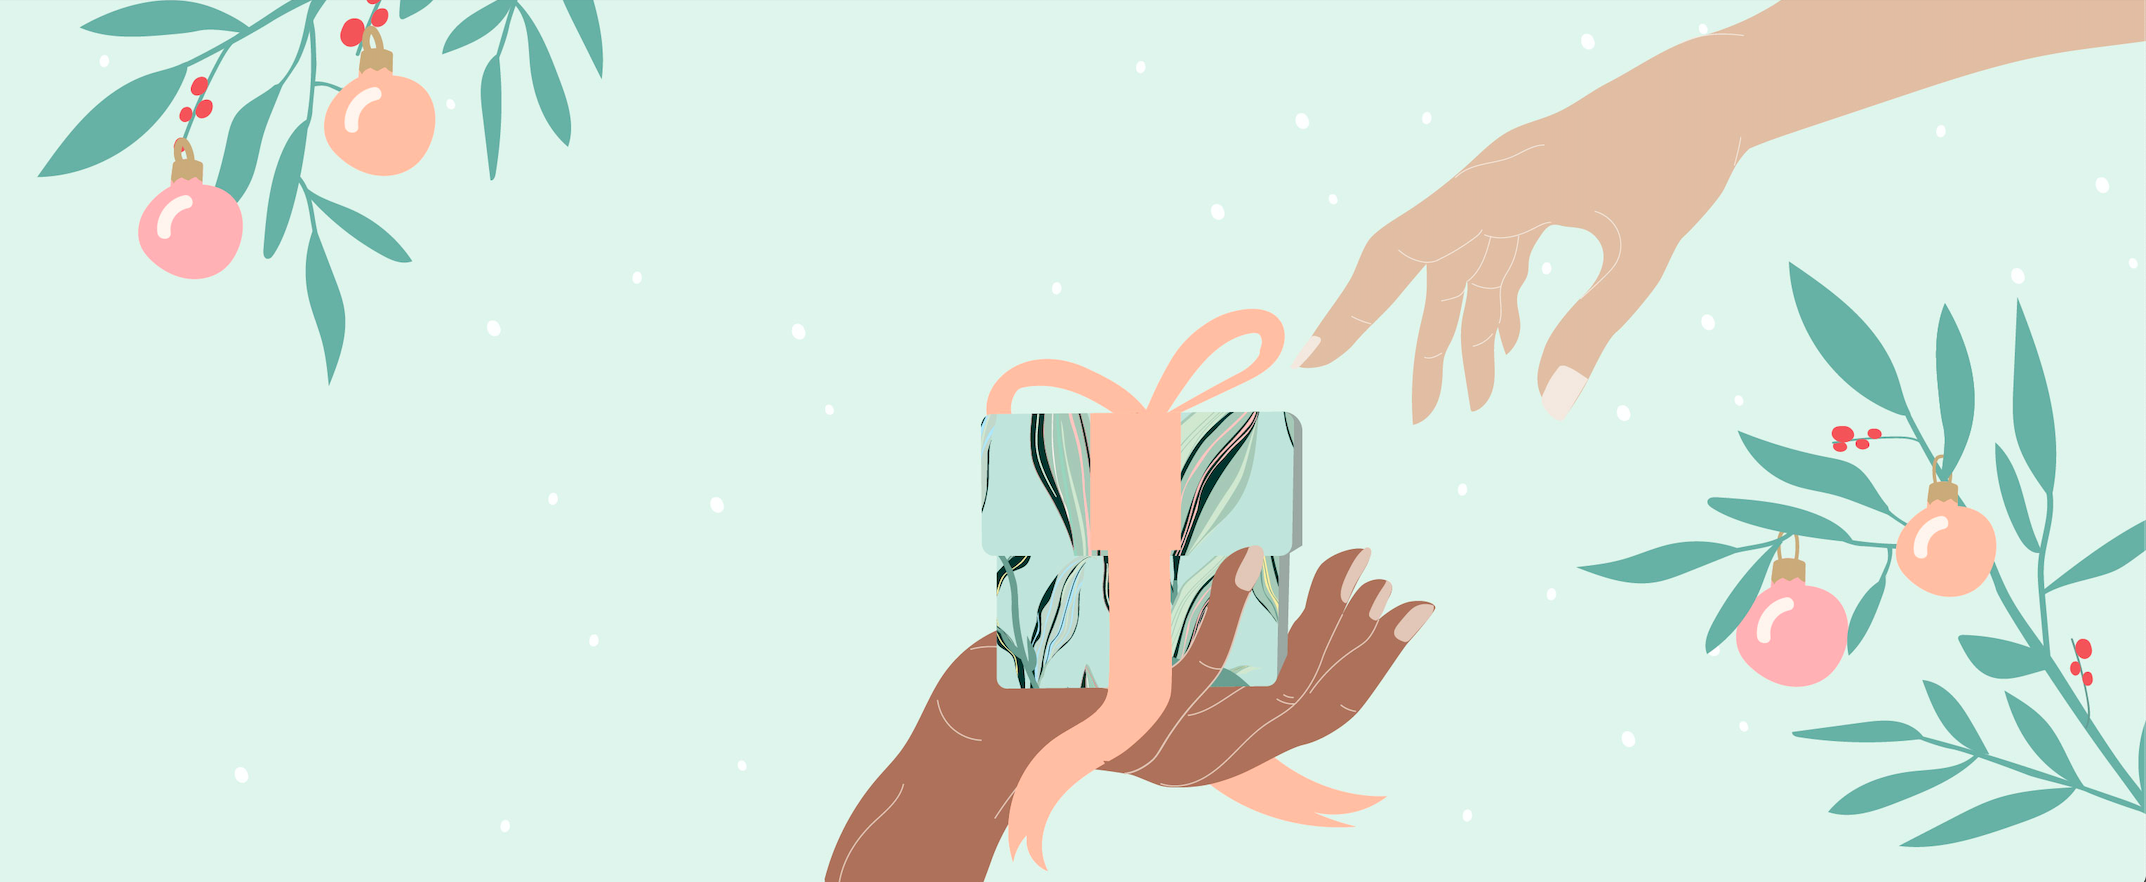 9 Self-Care Gift Ideas to Snag For Loved Ones (or Yourself!) – Rael